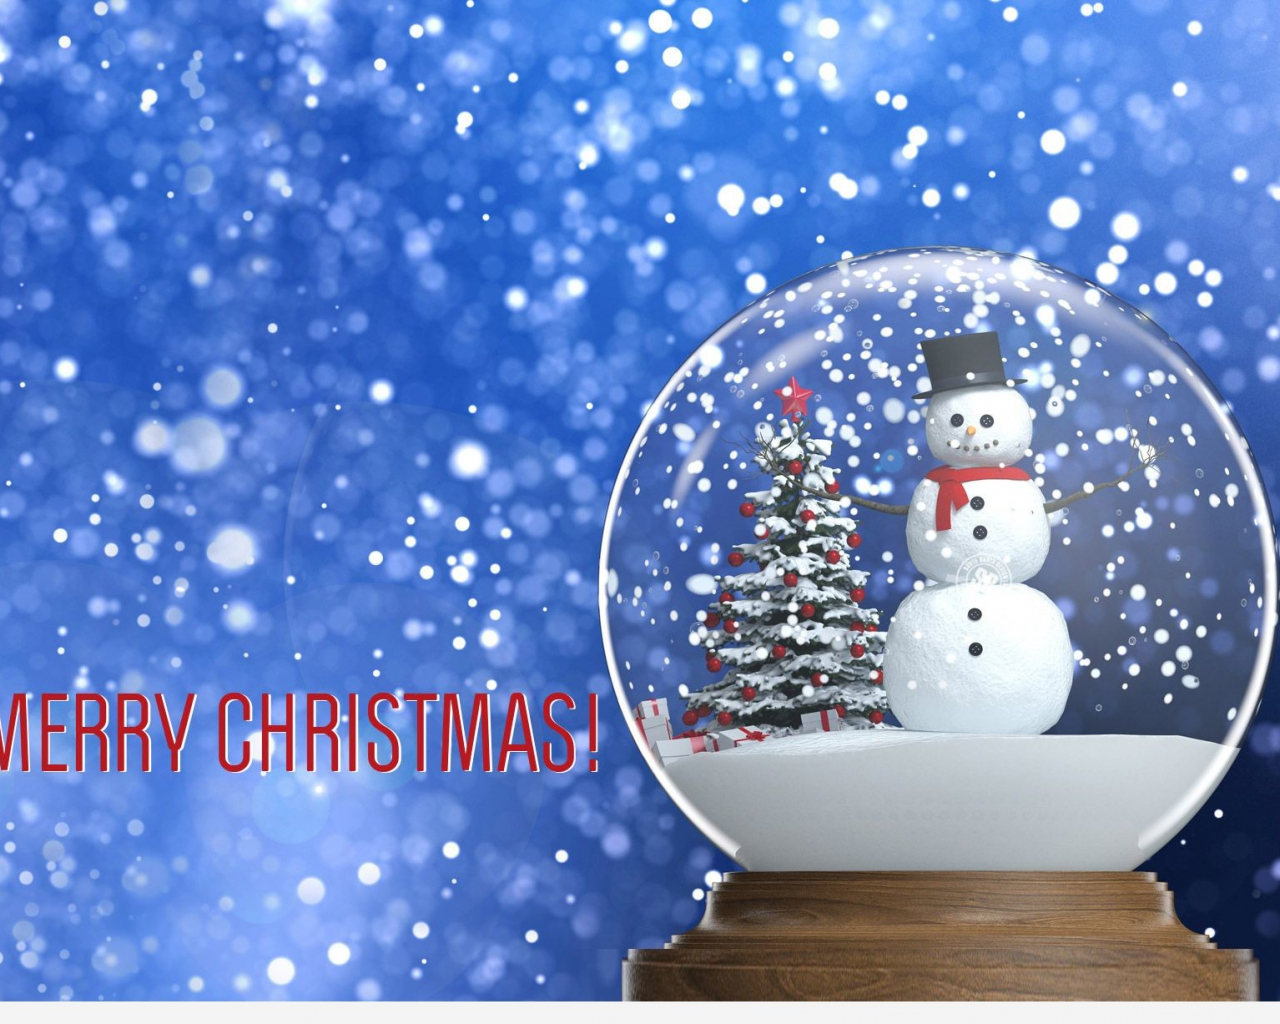 Free download Cute Merry Christmas Wallpaper - [1920x1227] for your Desktop, Mobile & Tablet. Explore Image Of Merry Christmas Wallpaper. Free Christmas Wallpaper, Merry Christmas Wallpaper Merry Christmas Wallpaper for iPhone